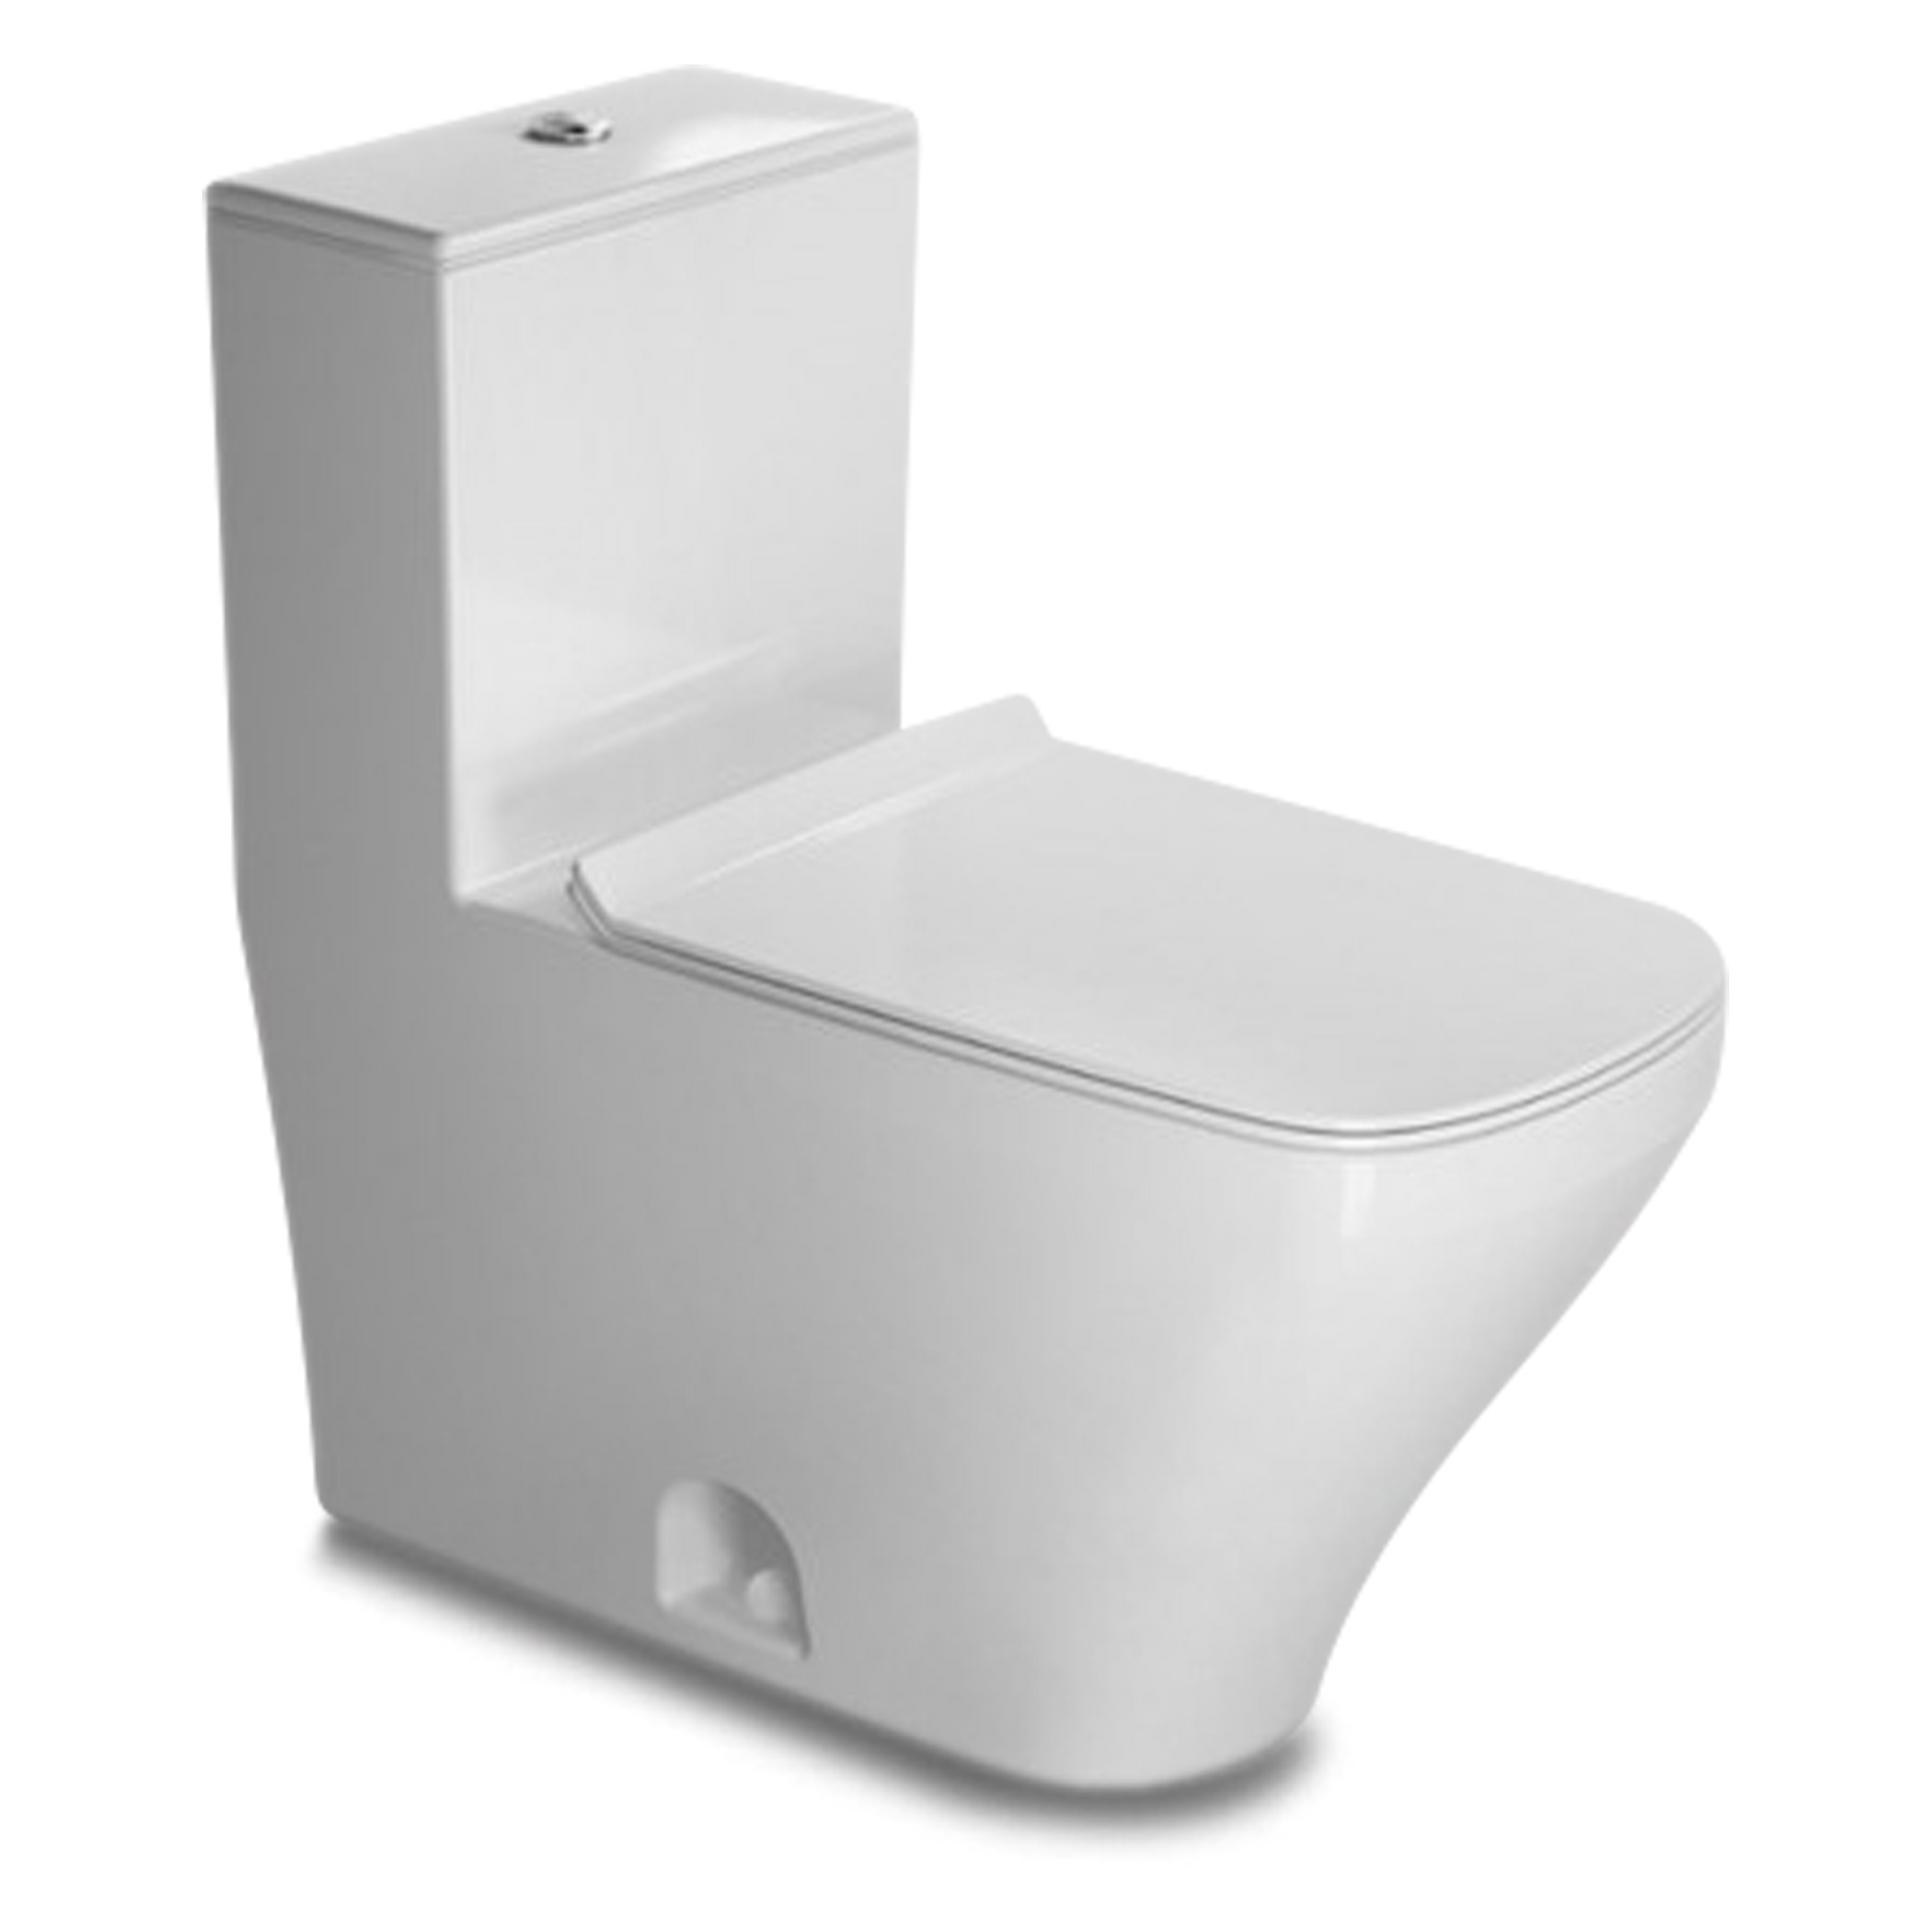 Designed by Matteo Thun, this seamless, modern, one-piece toilet features an elongated bowl, and dual flush technology.